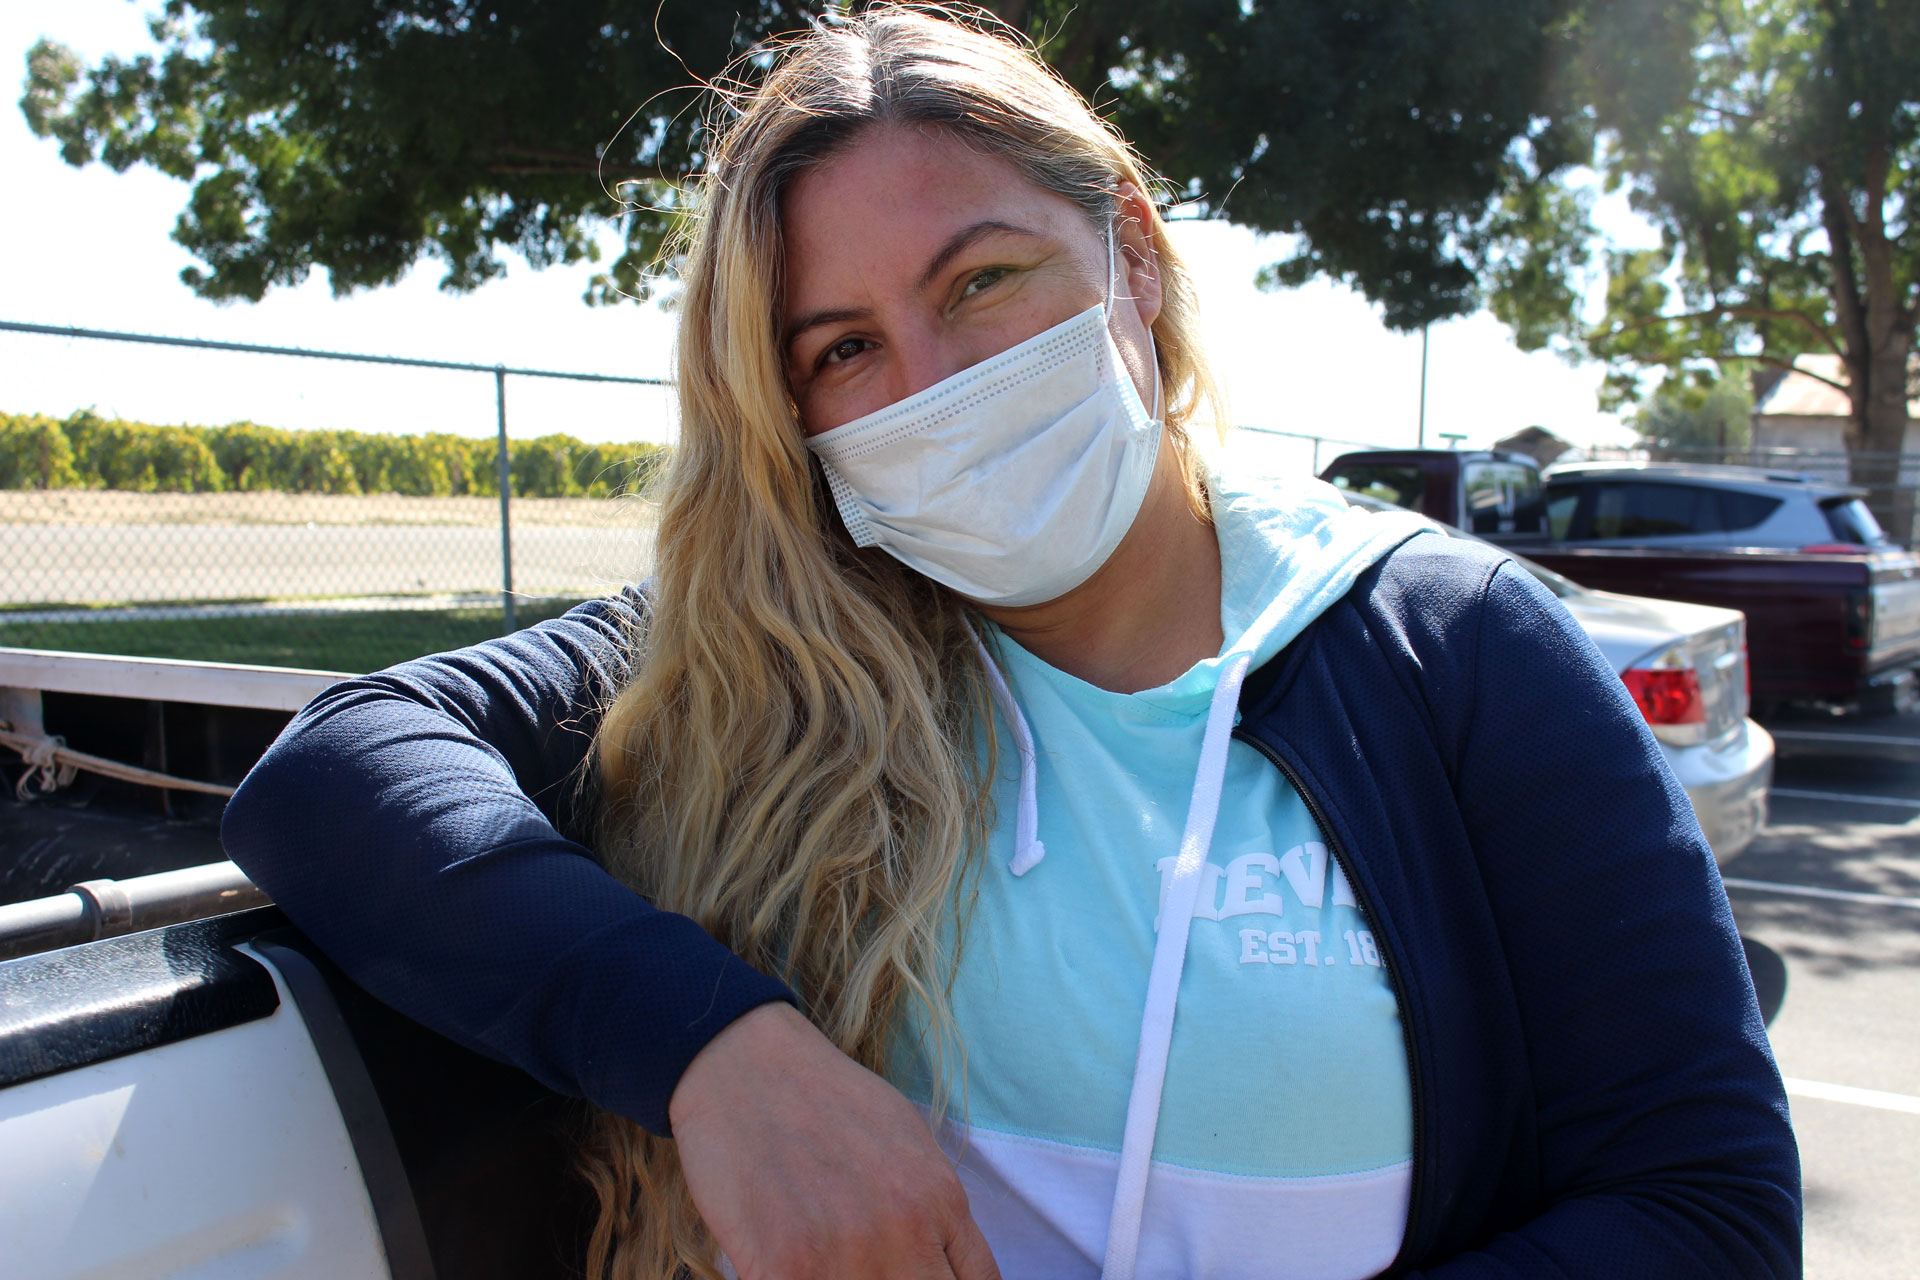 A light-complected woman with long blond hair looks frankly at the camera, her right elbow propped on top of a car, her head tipped to her right. She wears a white mask that covers her face from nose to chin, a teal and white sweatshirt, and a dark blue jacket. Beyond her and beneath a leafy tree, a couple other parked cars are visible, and beyond a chain link fence lies a field with brown dirt and bright green leafy crops.